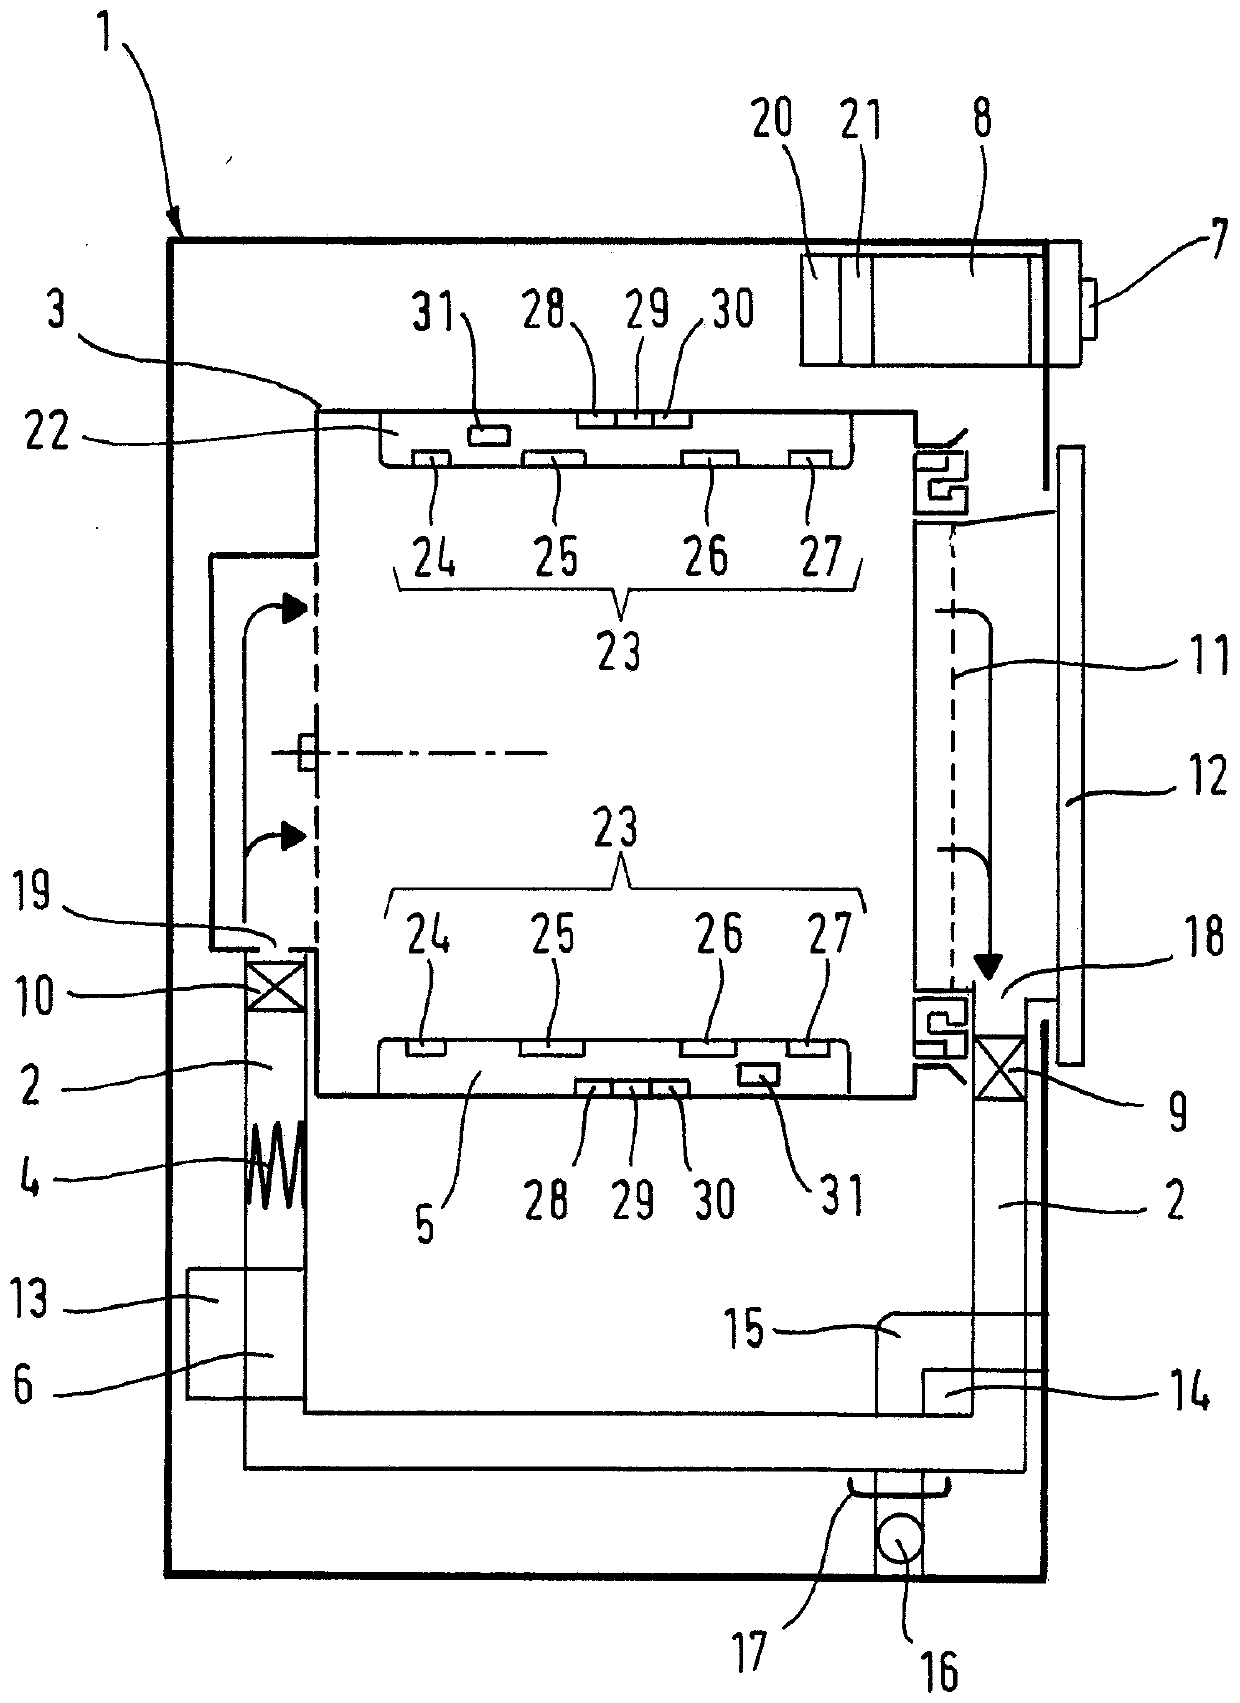 Laundry dryer with acceleration sensor and method for its operation